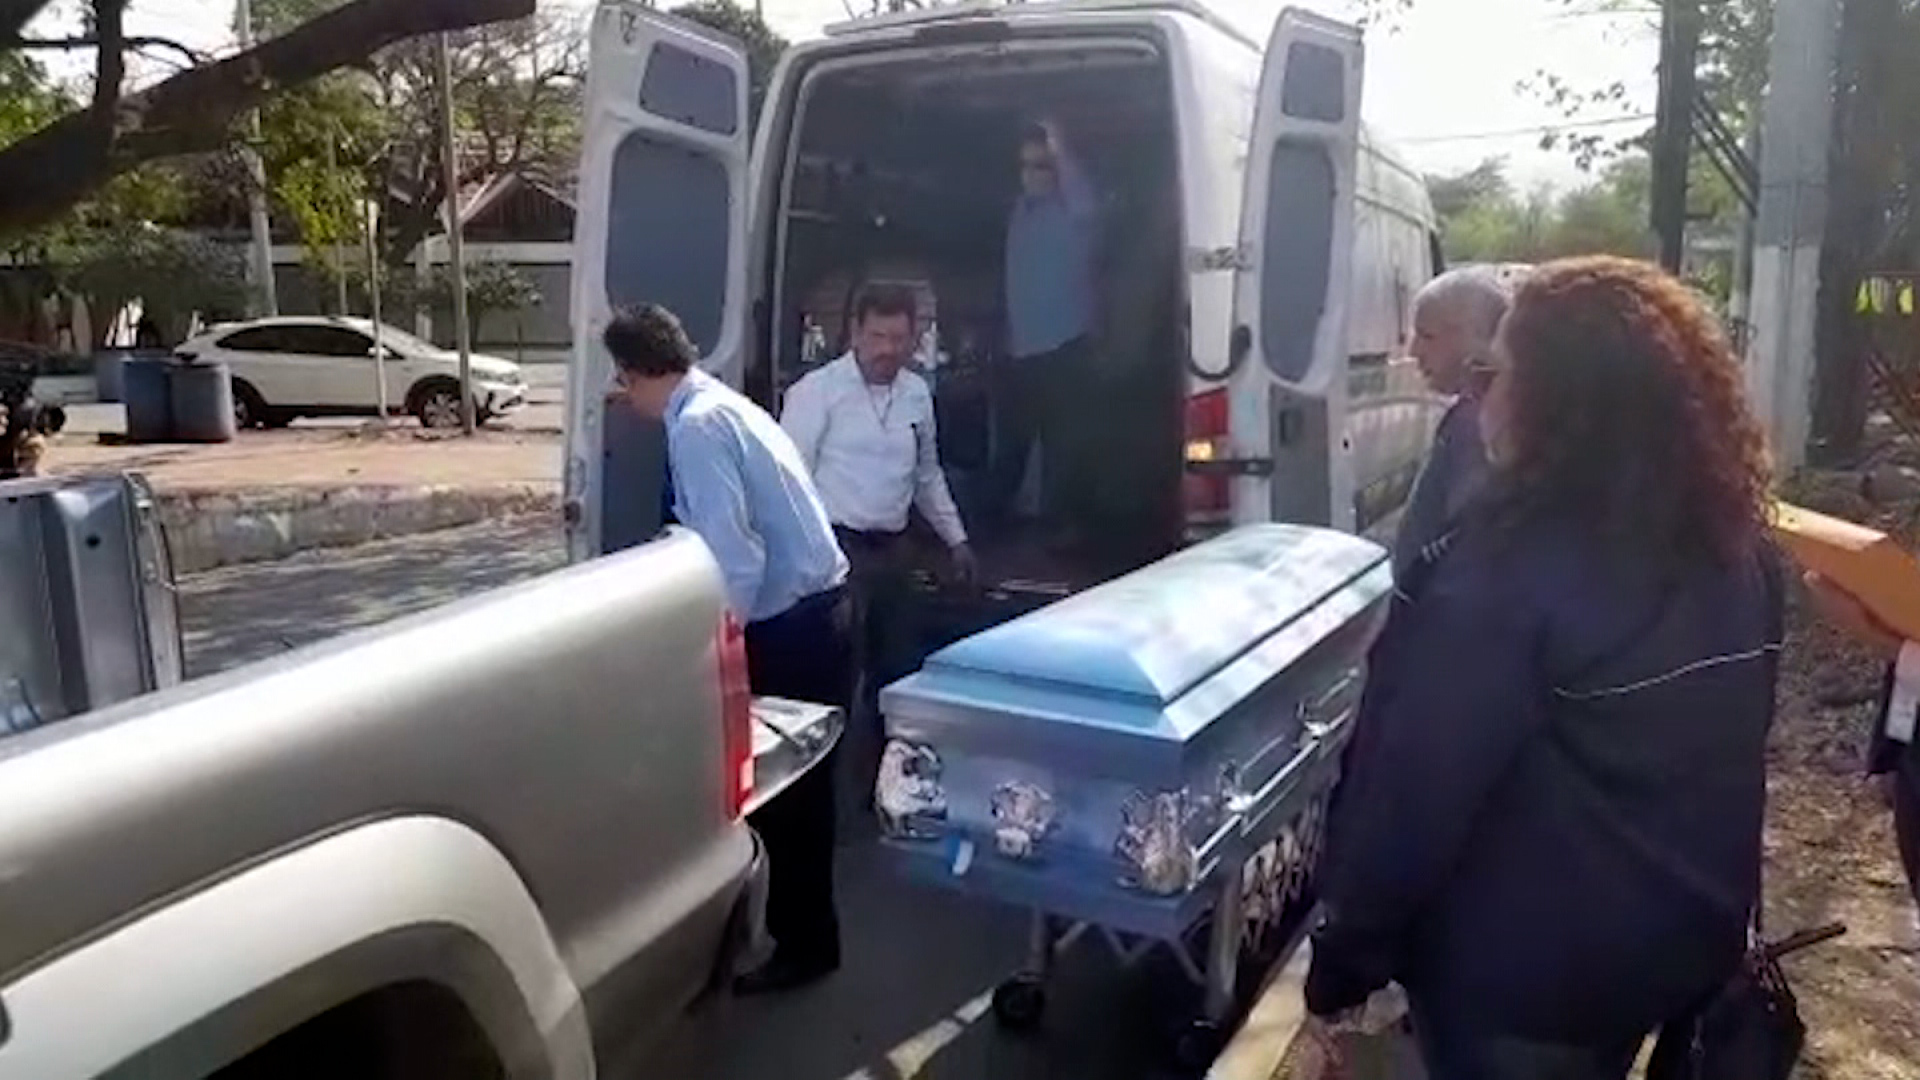 The bodies of 7 migrants who died in a fire in Mexico have arrived in El Salvador